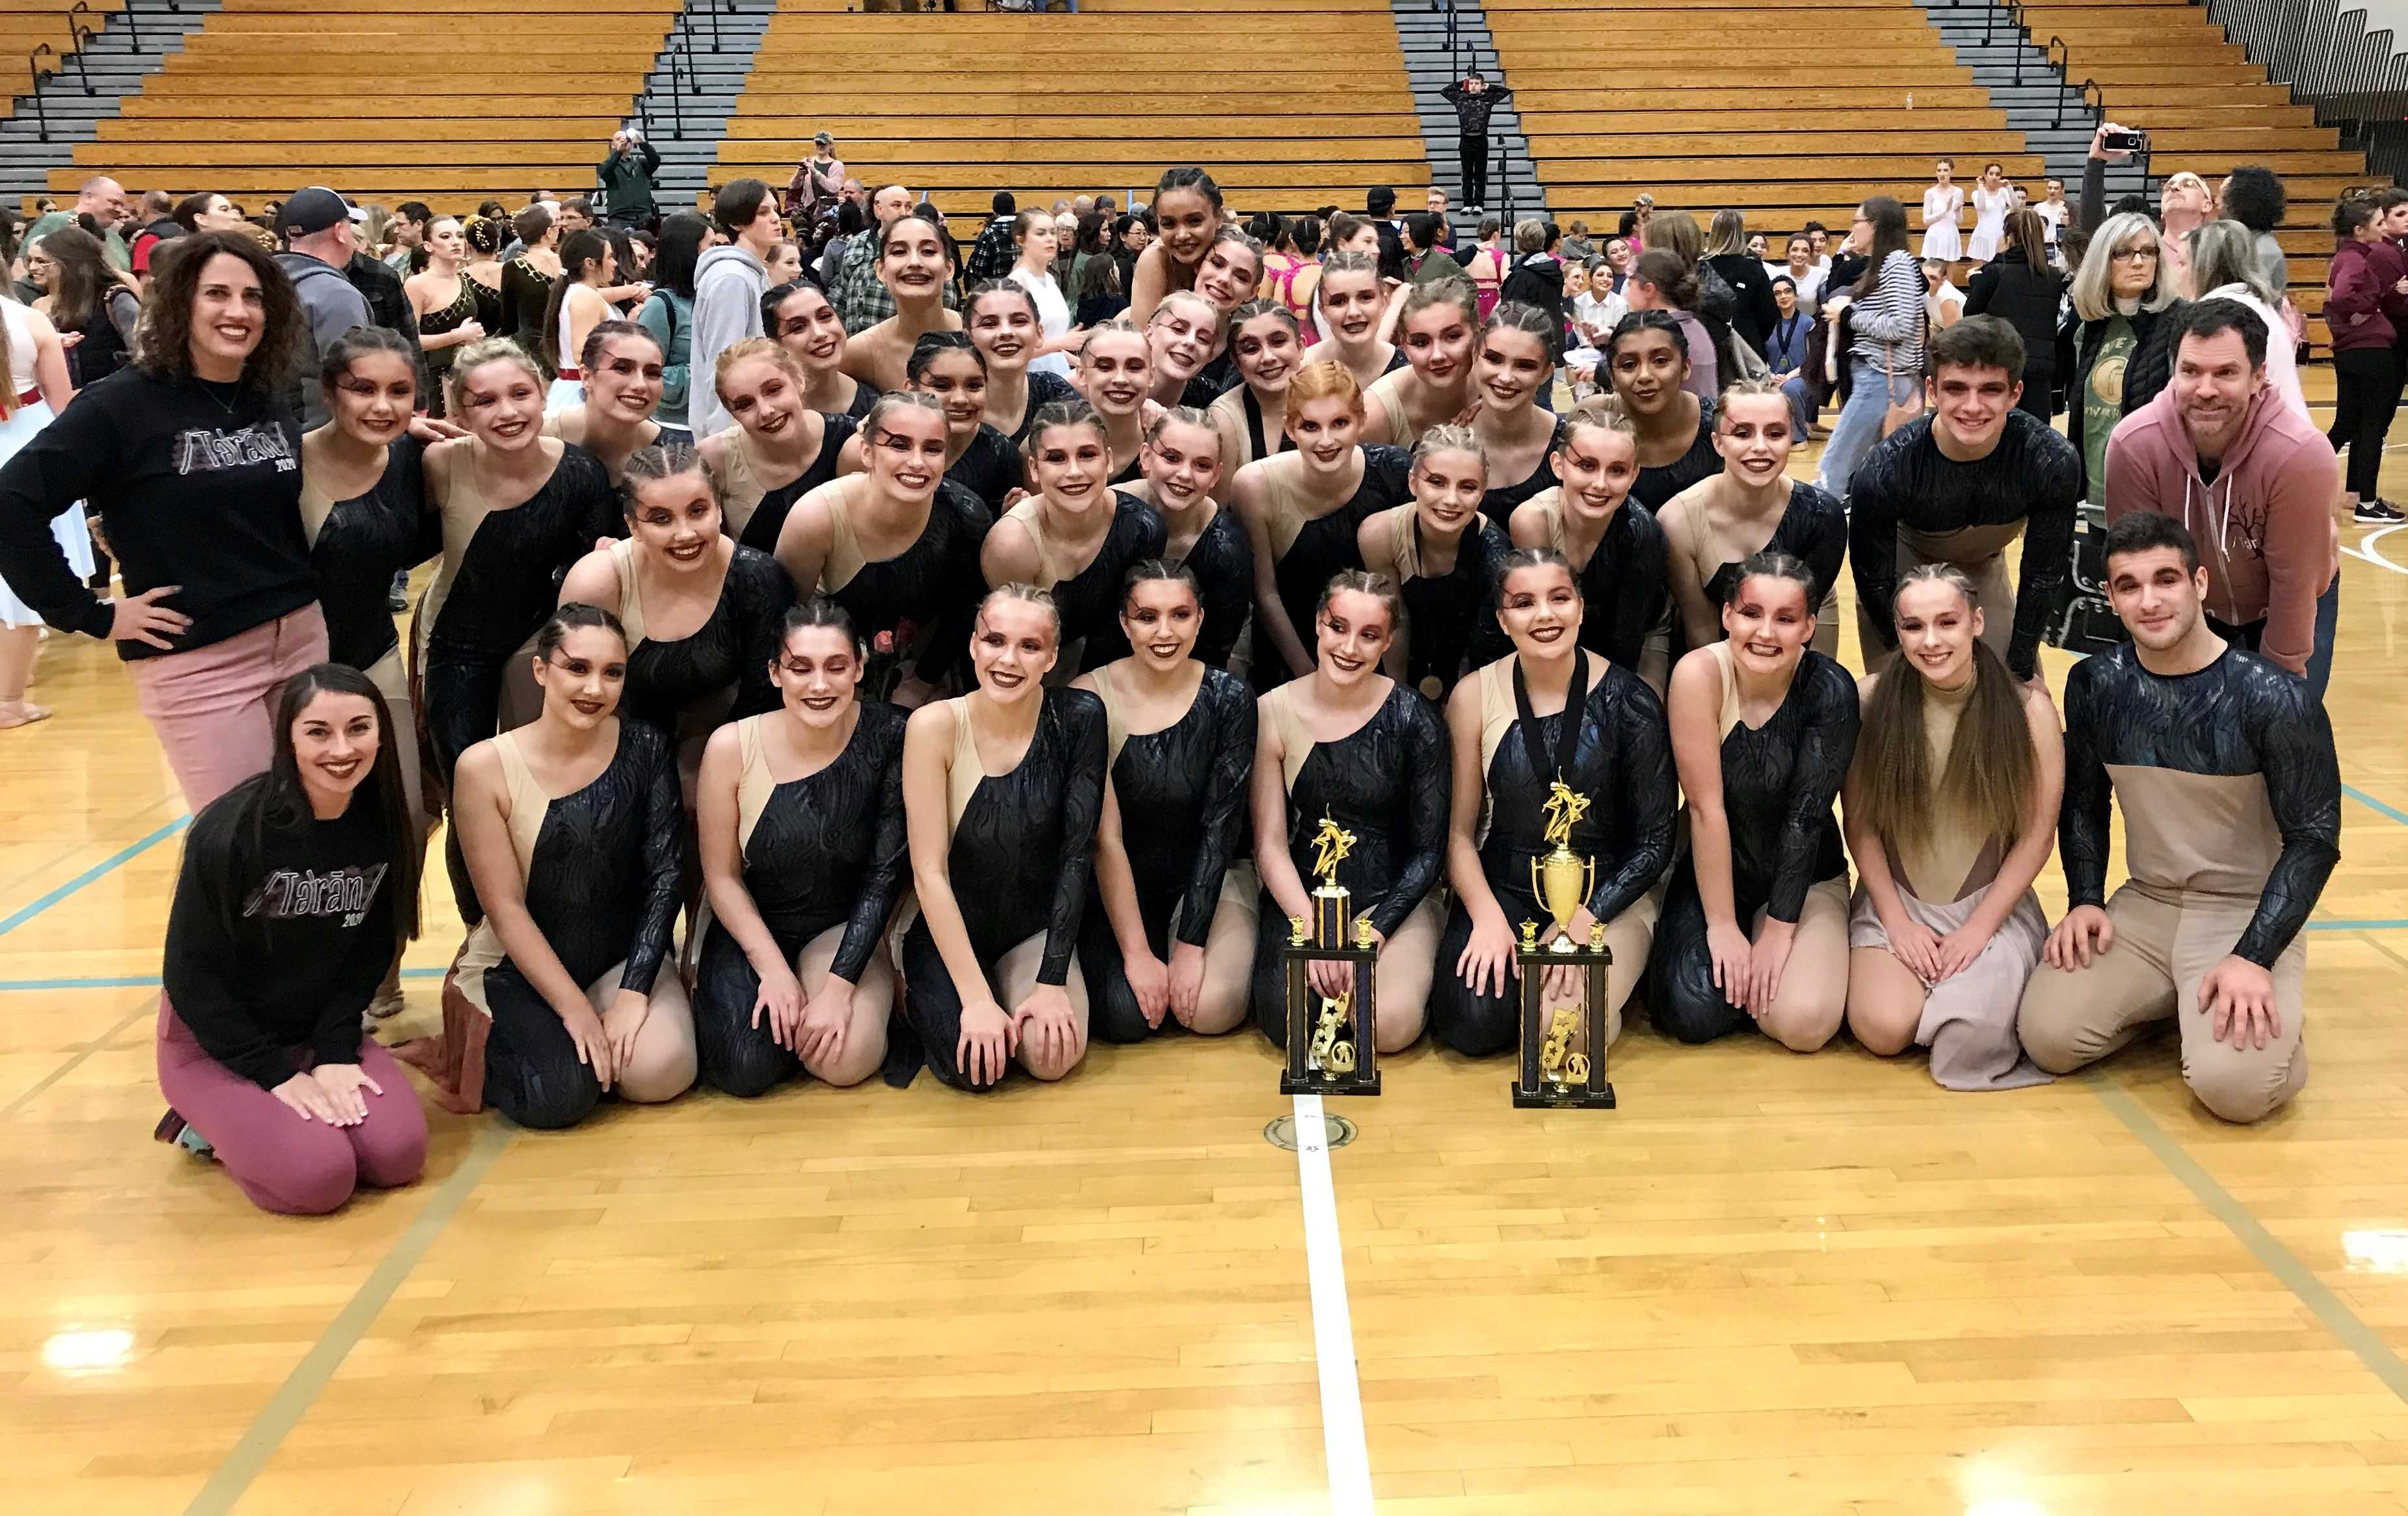 The Cougar Dancers after winning the Show Division and Grand Champion honors at Liberty.